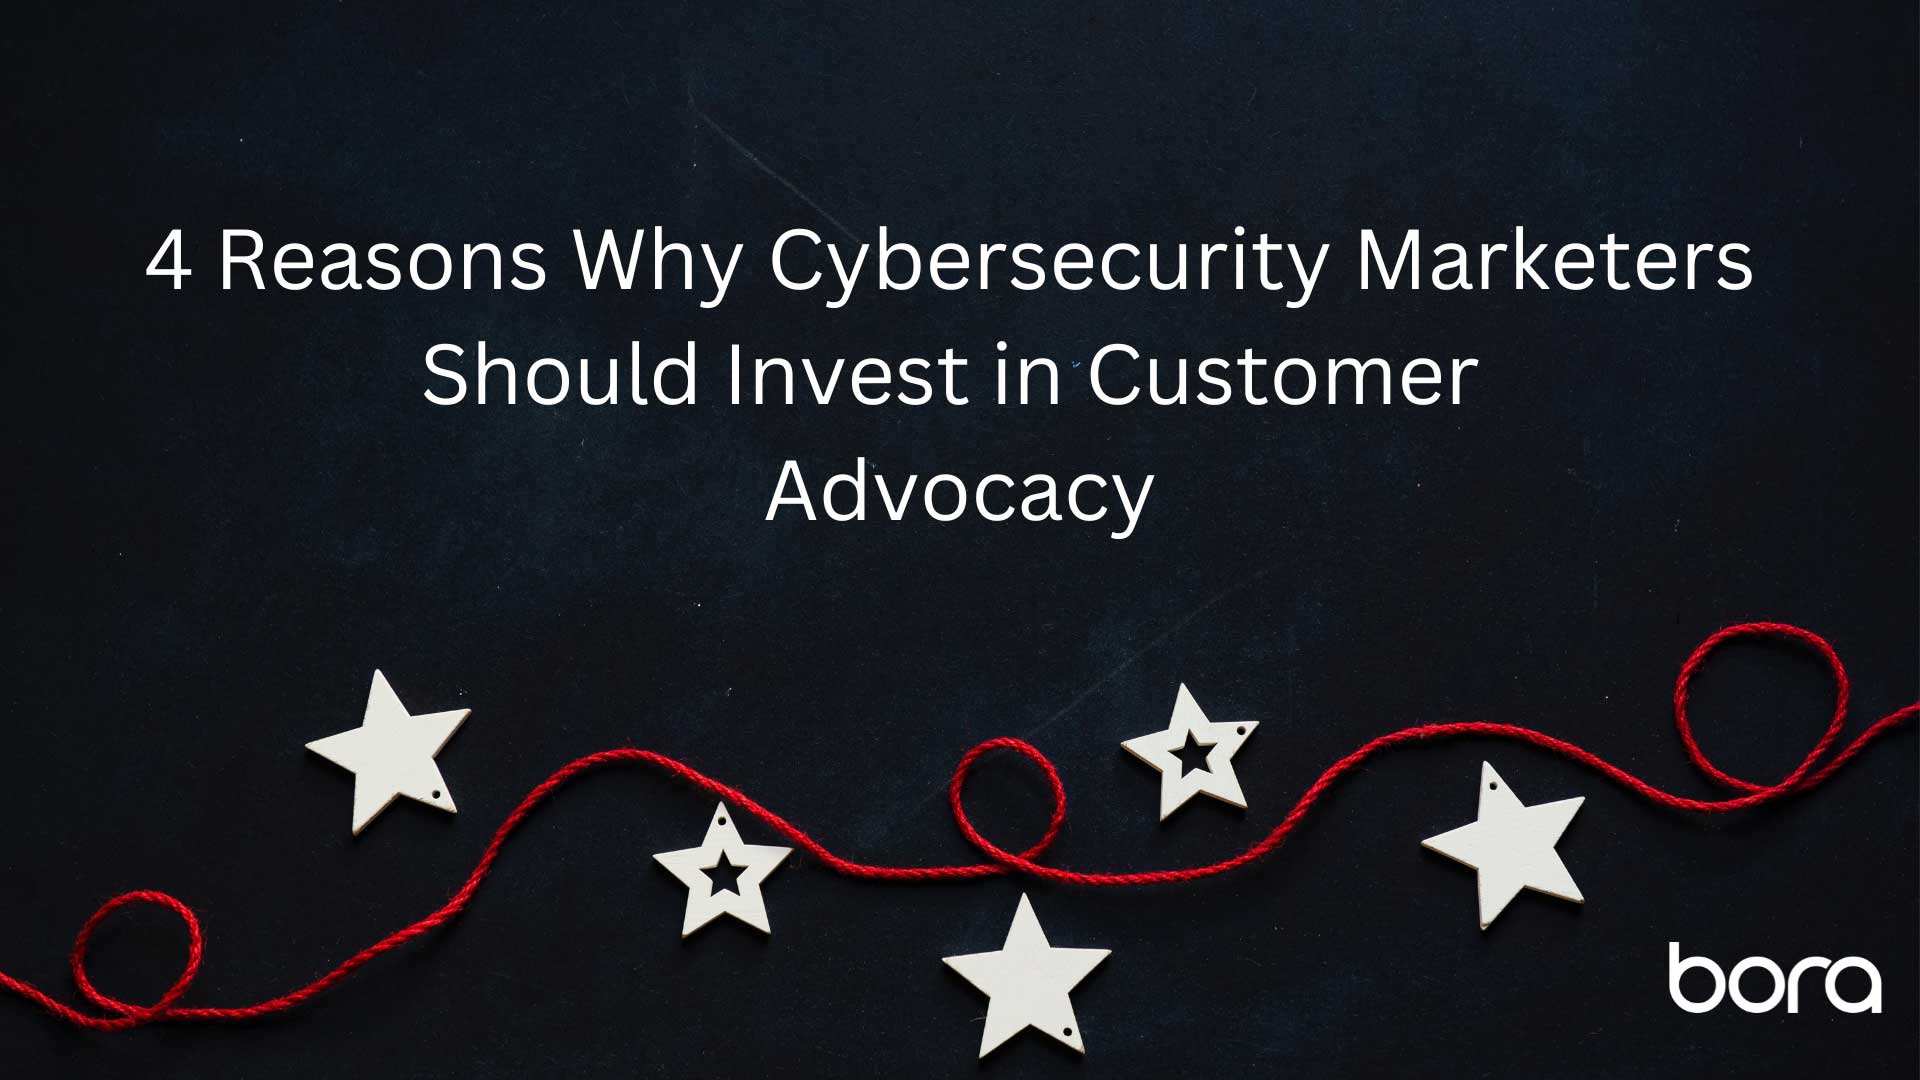 4 Reasons Why Cybersecurity Marketers Should Invest in Customer Advocacy